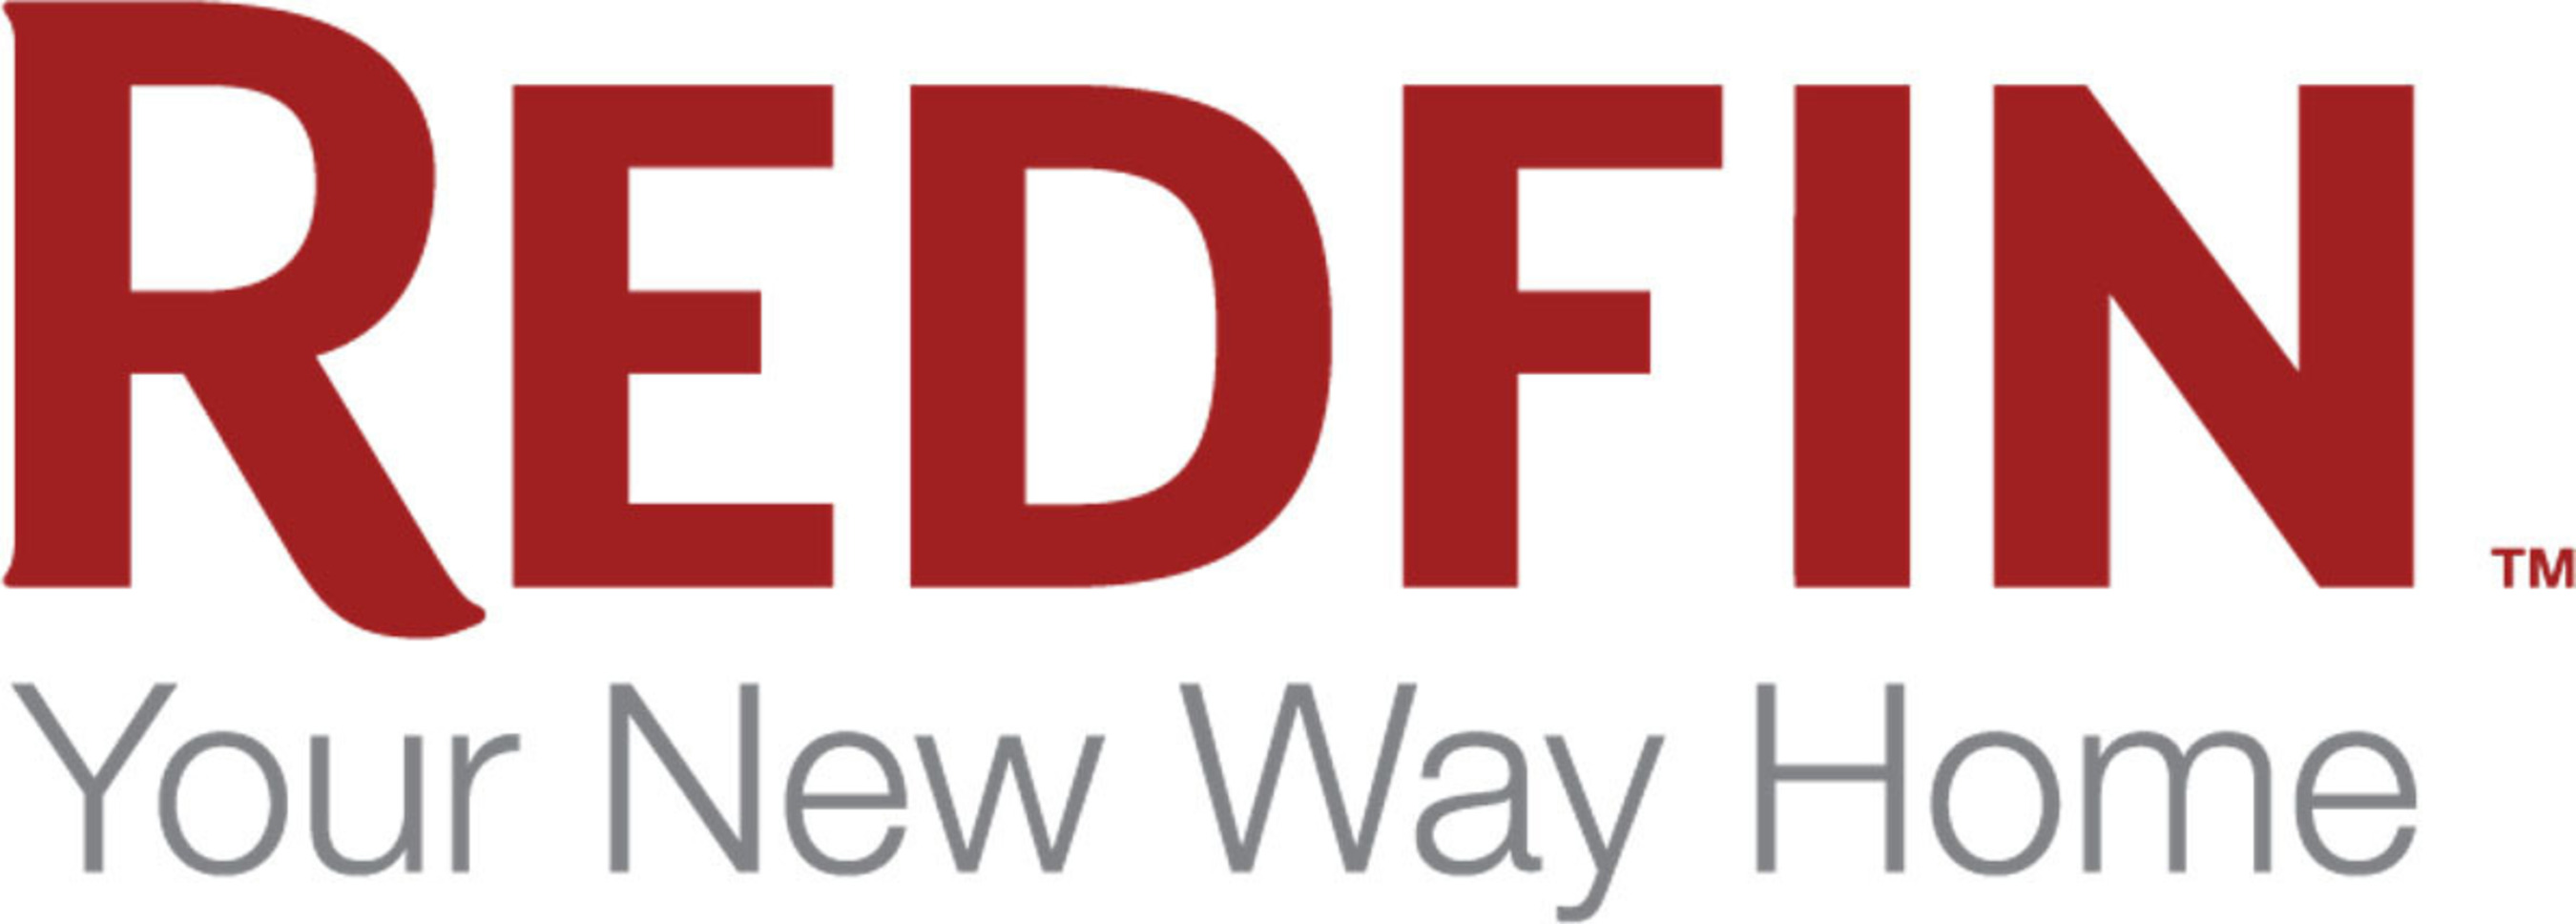 Redfin is the technology-powered real estate brokerage. (PRNewsFoto/Redfin) (PRNewsFoto/REDFIN)